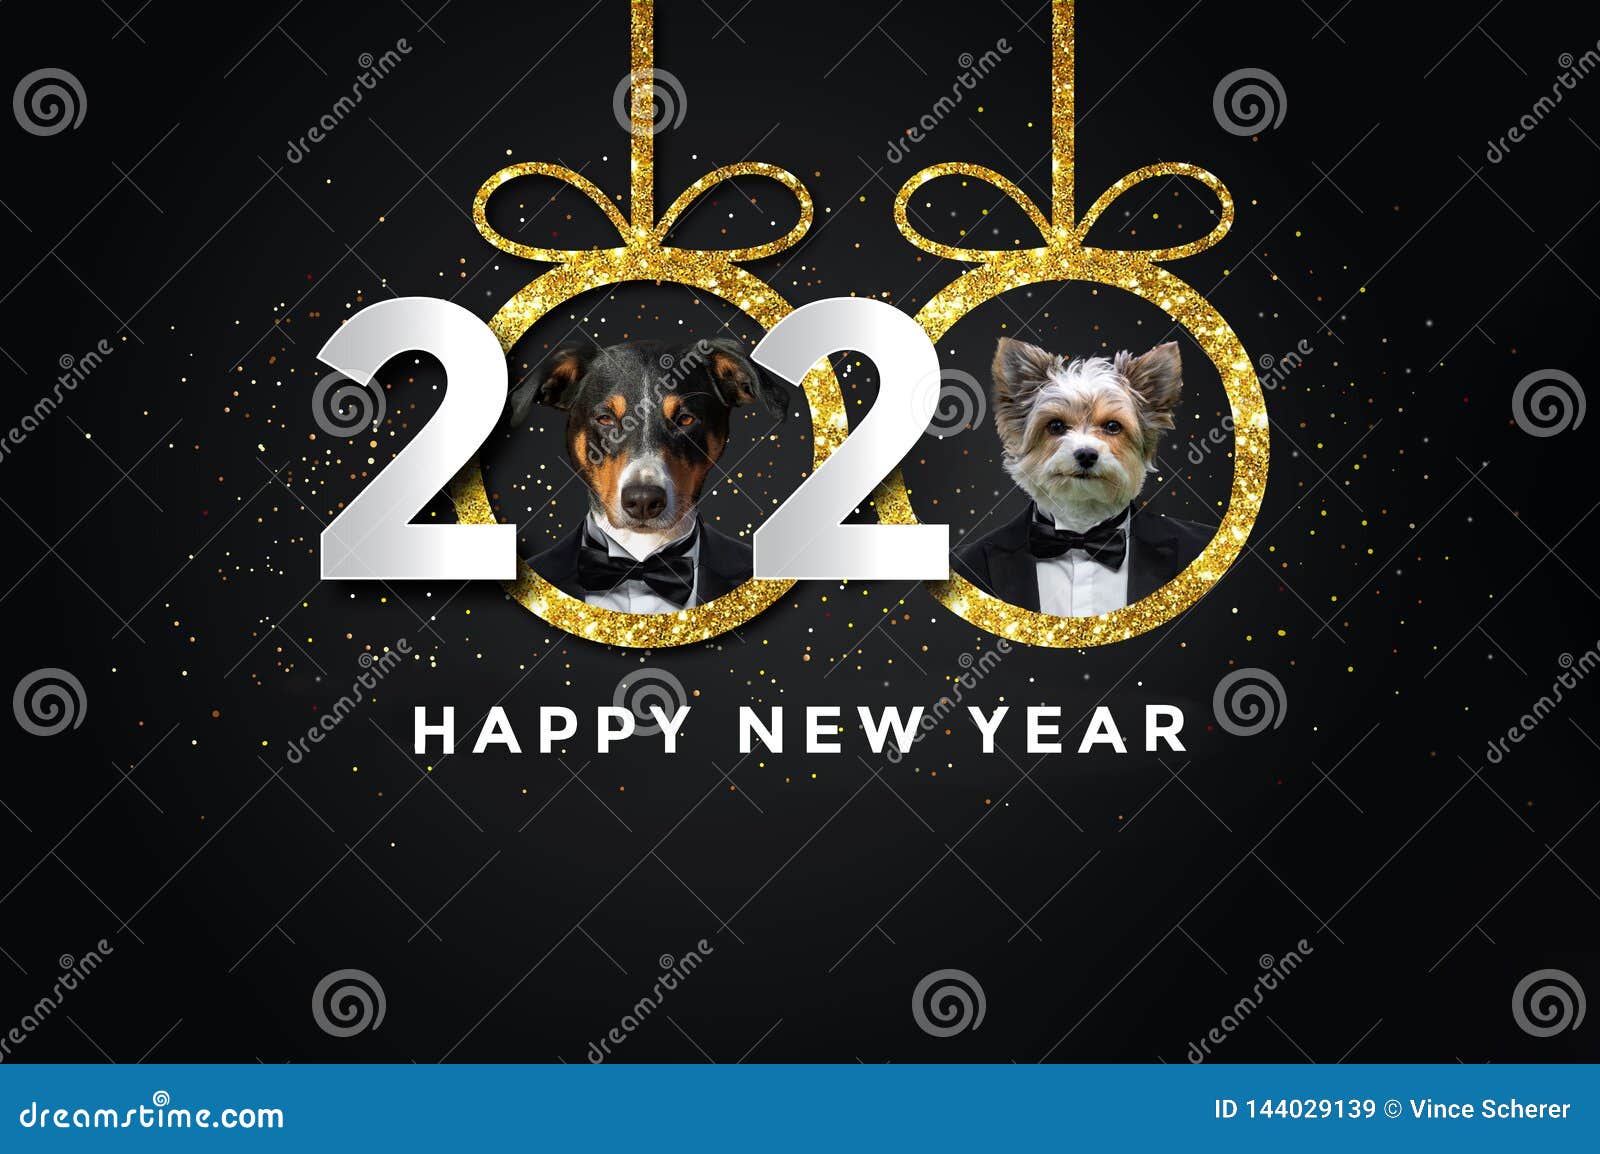 Adorable Chihuahua Happy New Year 2020